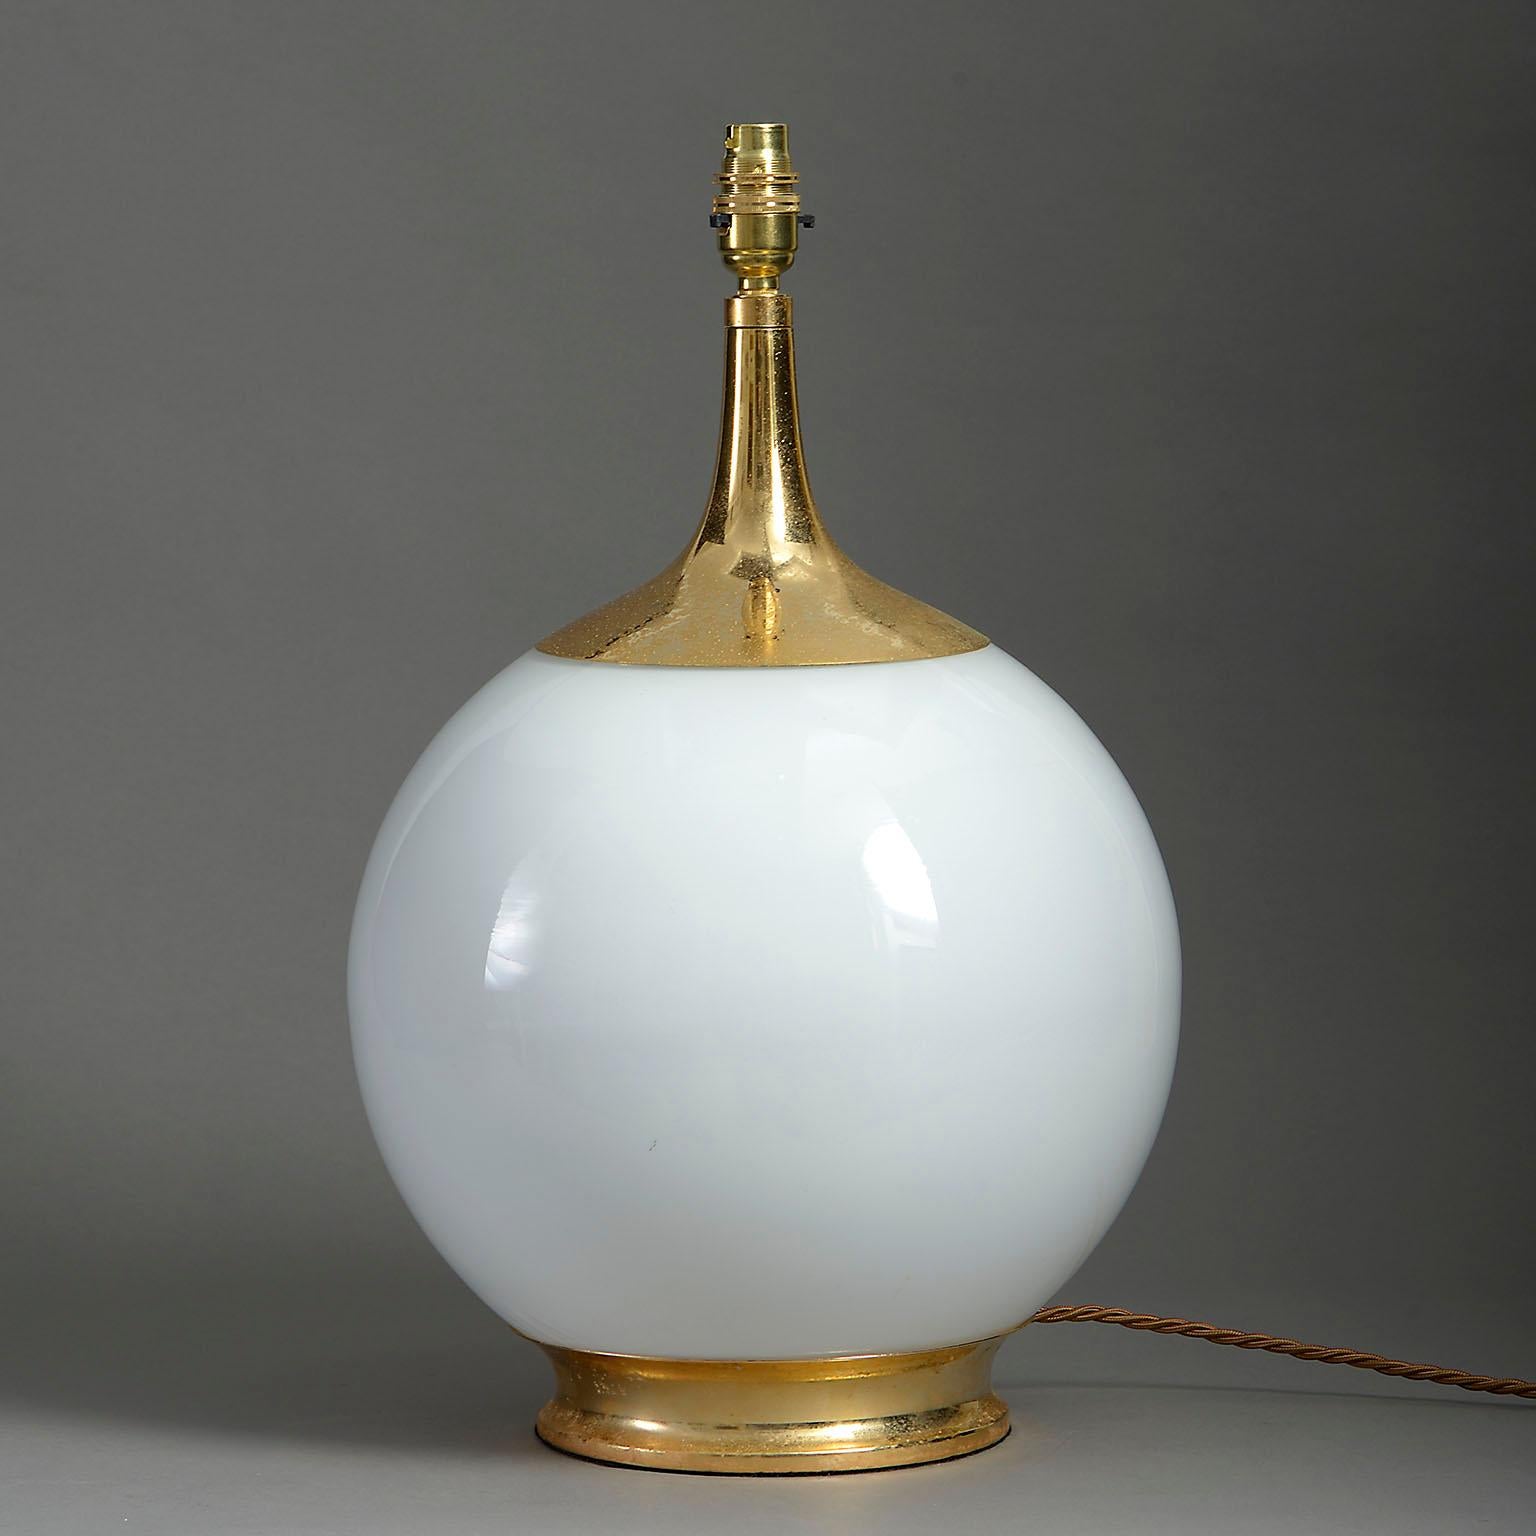 A mid-twentieth century Futurist lamp base, the opaline glass body with gilt metal cap and base.

Dimensions include period parts only and do not include the bayonet bulb holder.

Wired to UK specifications. This lamp can be rewired to all